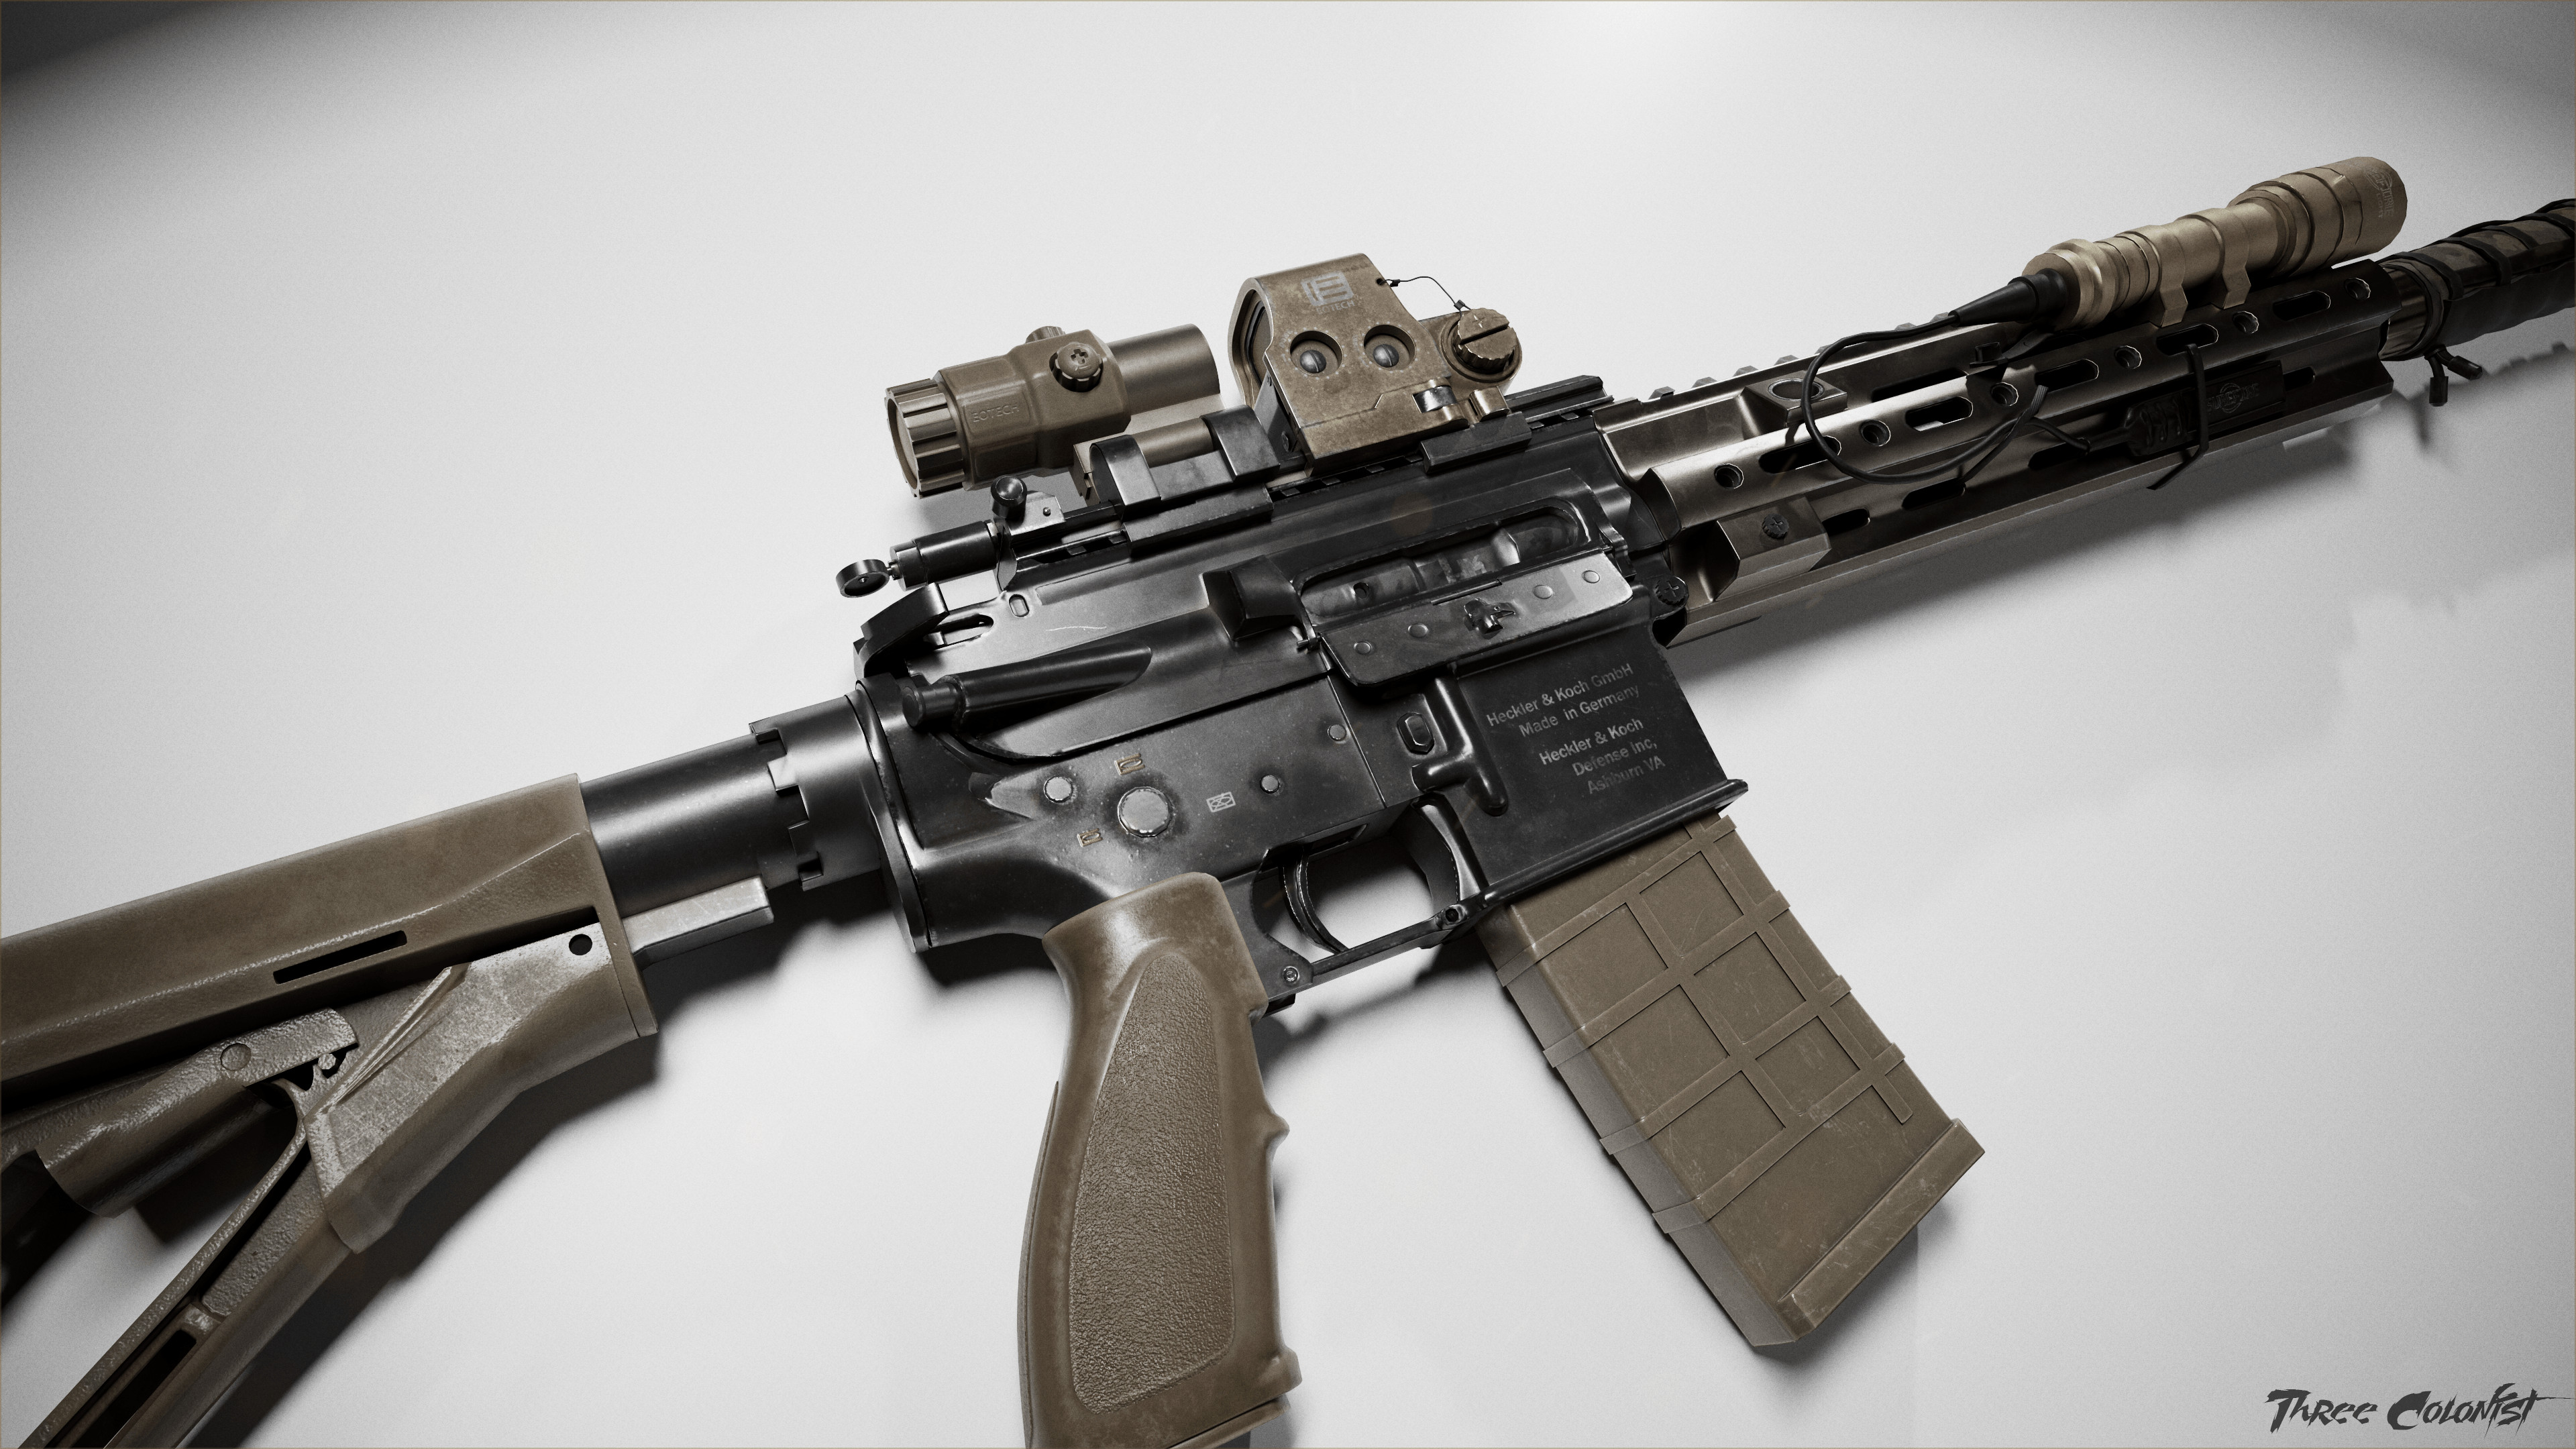 G3 San Ave Rifle Background 3d Model 3d Model Automatic Rifle With A  Collimator Sight And Flashli Hd Photography Photo Background Image And  Wallpaper for Free Download